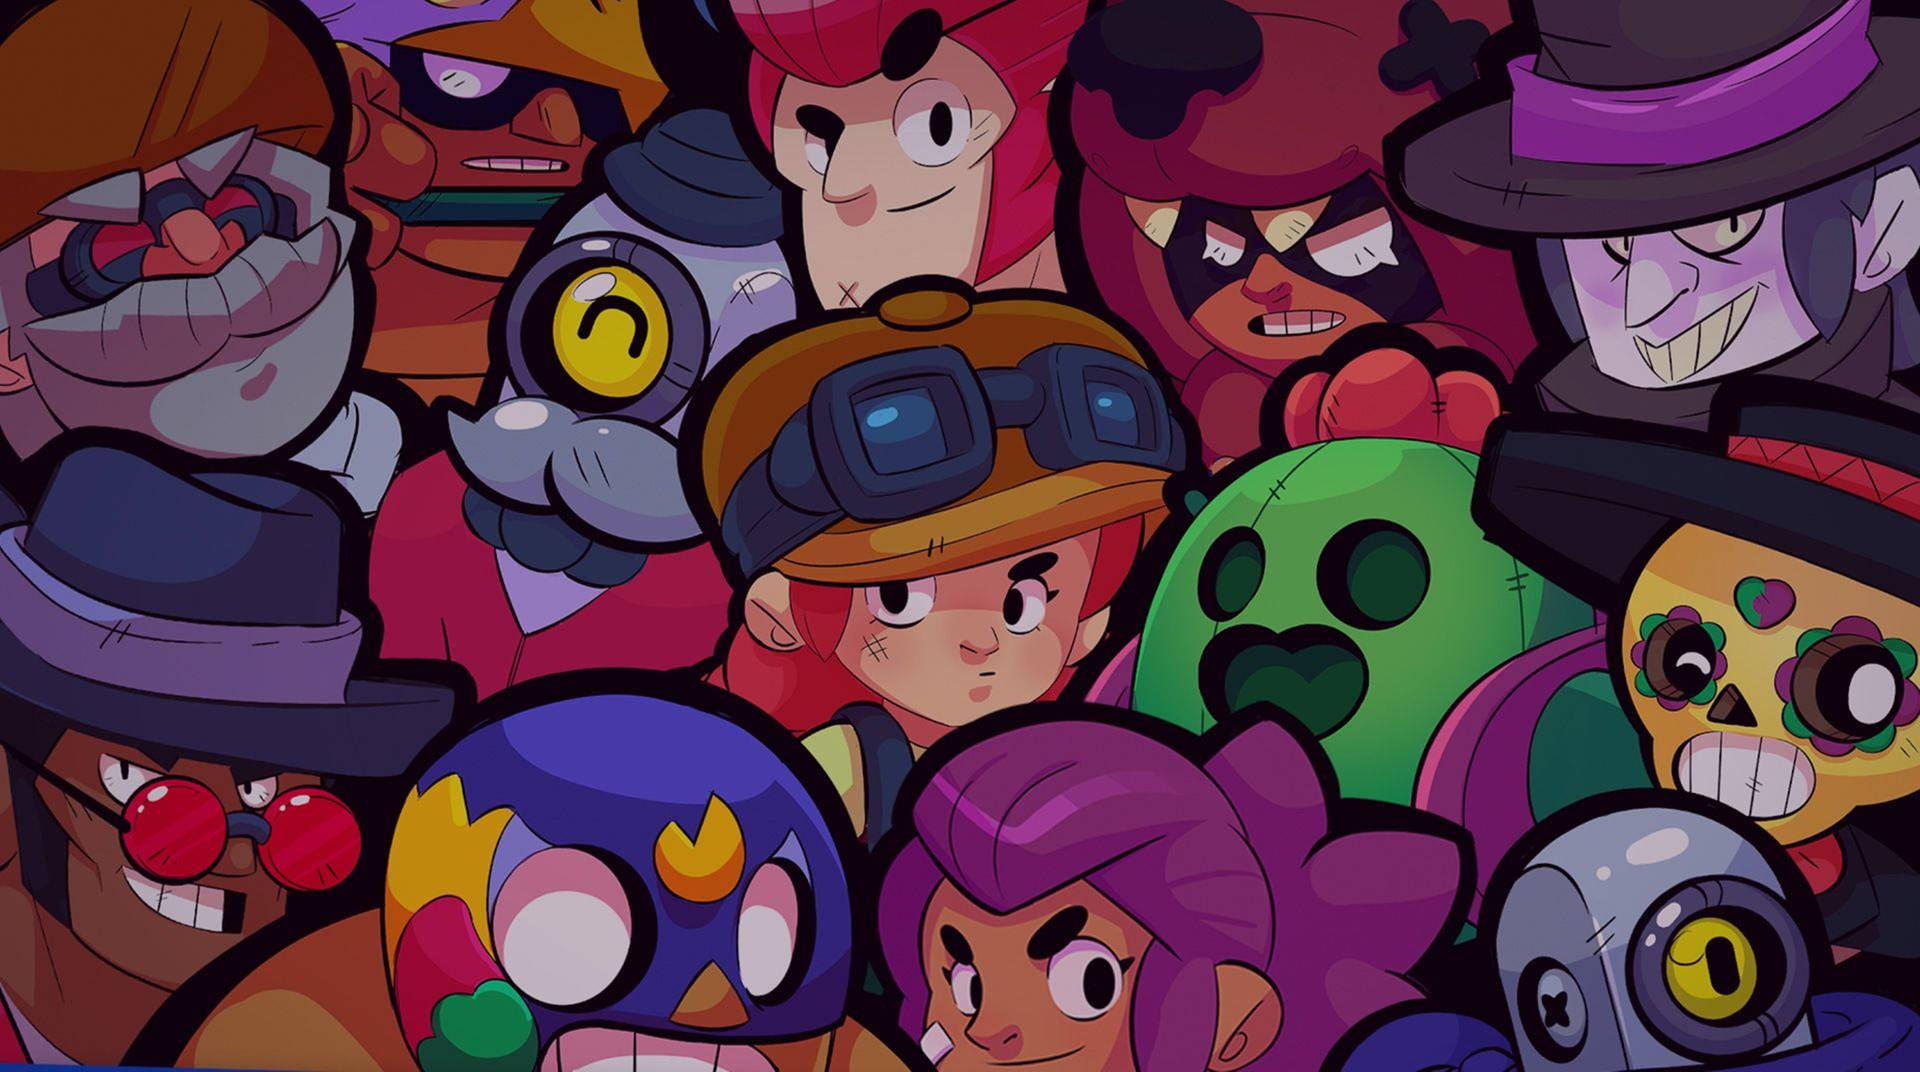 Sinister Brawlers Of Brawl Stars In A Vibrant 4k Display Background